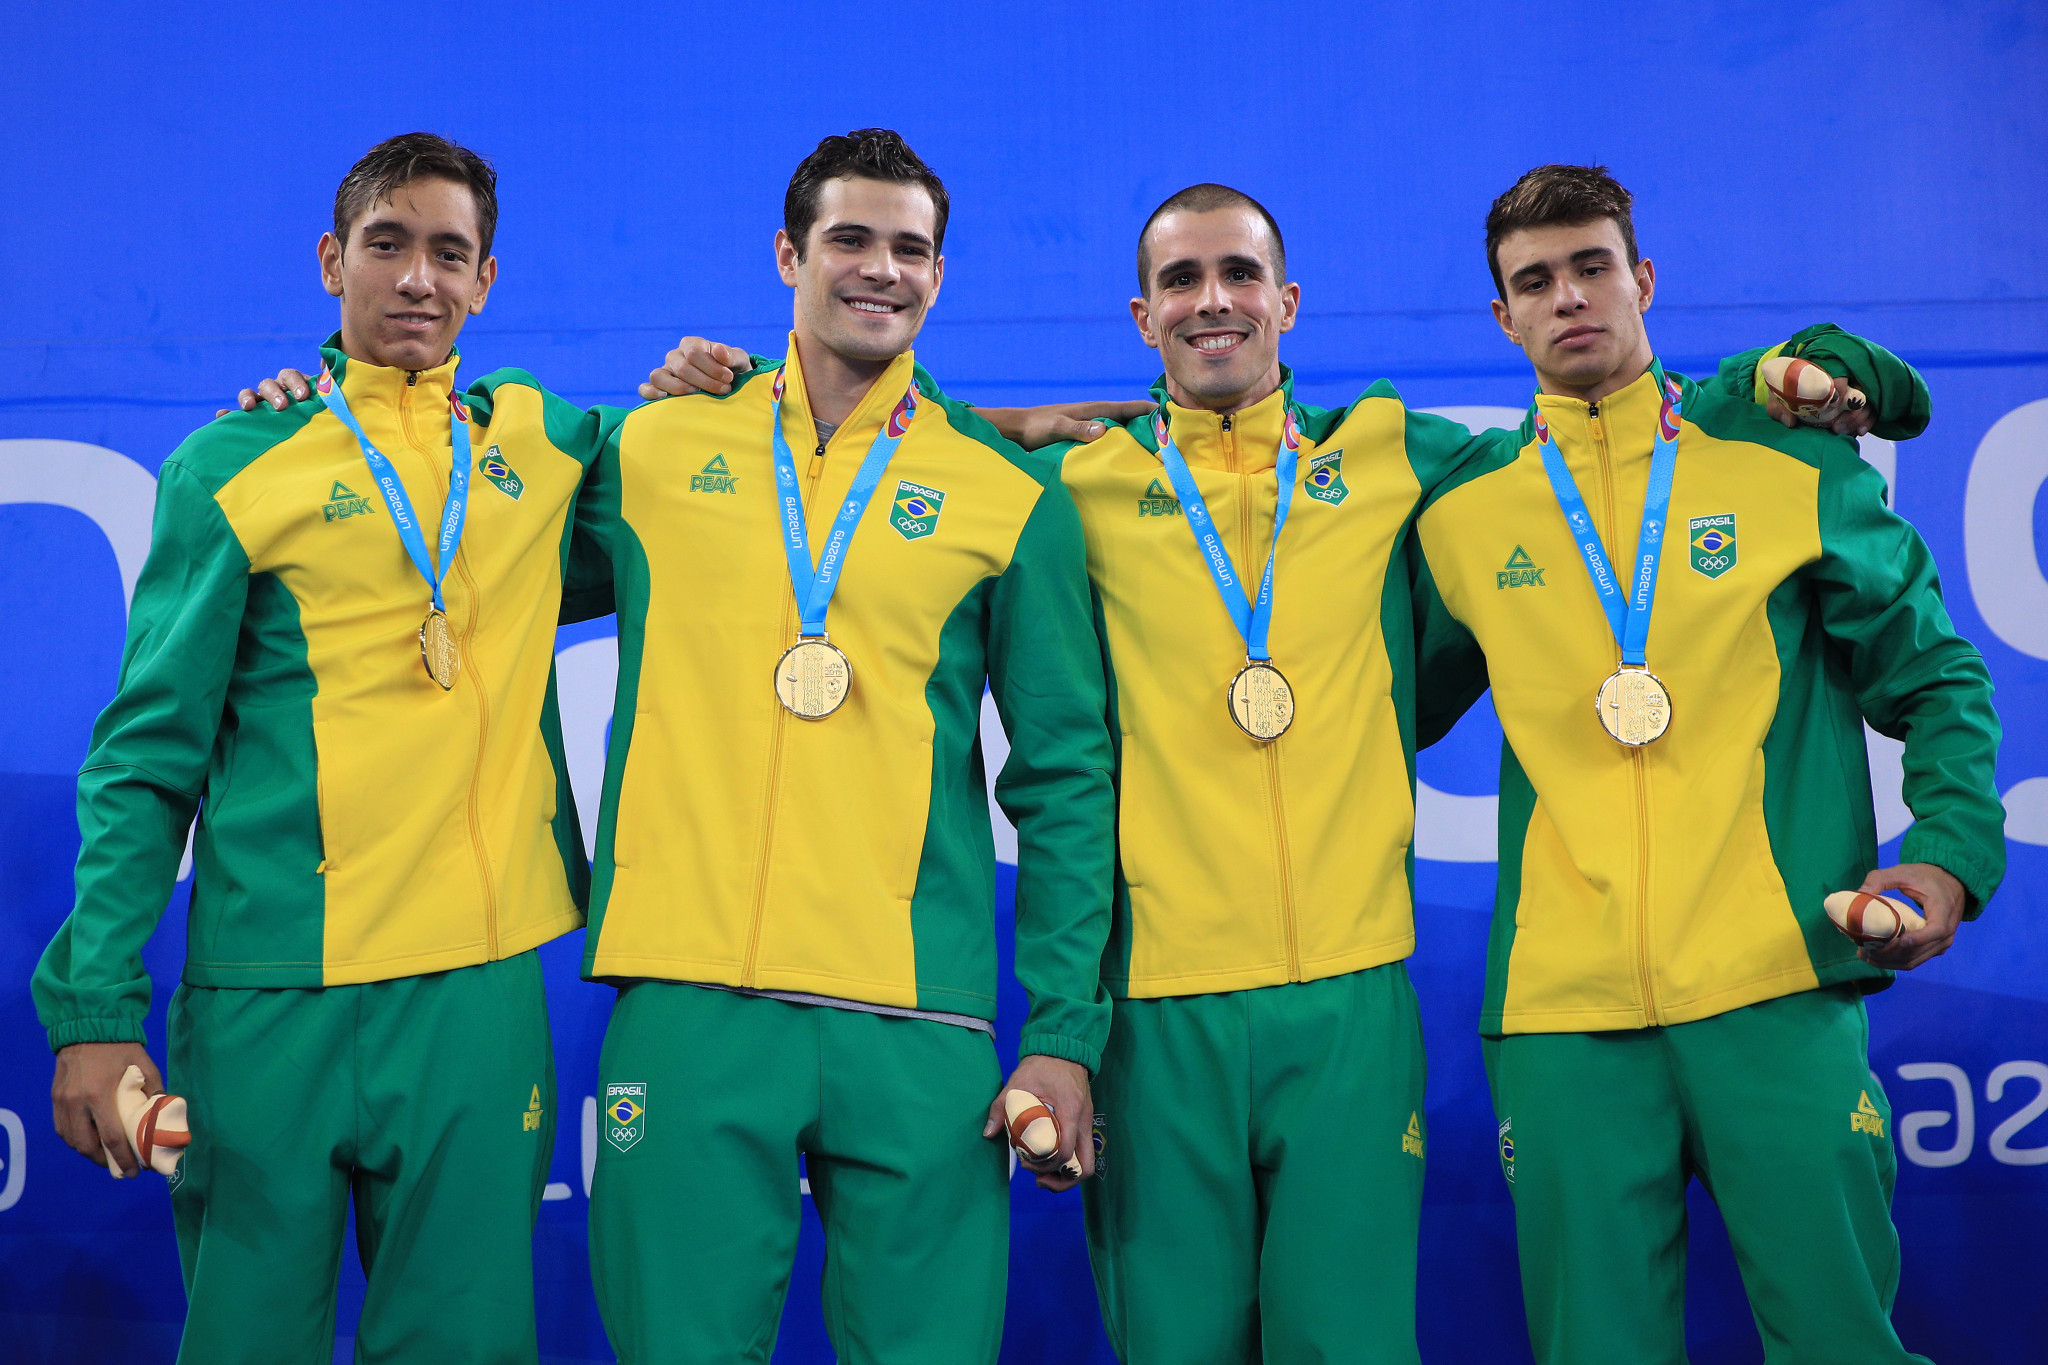 Brazil were the gold medallists in the Lima 2019 men's swimming 4x100m freestyle relay ©Lima 2019